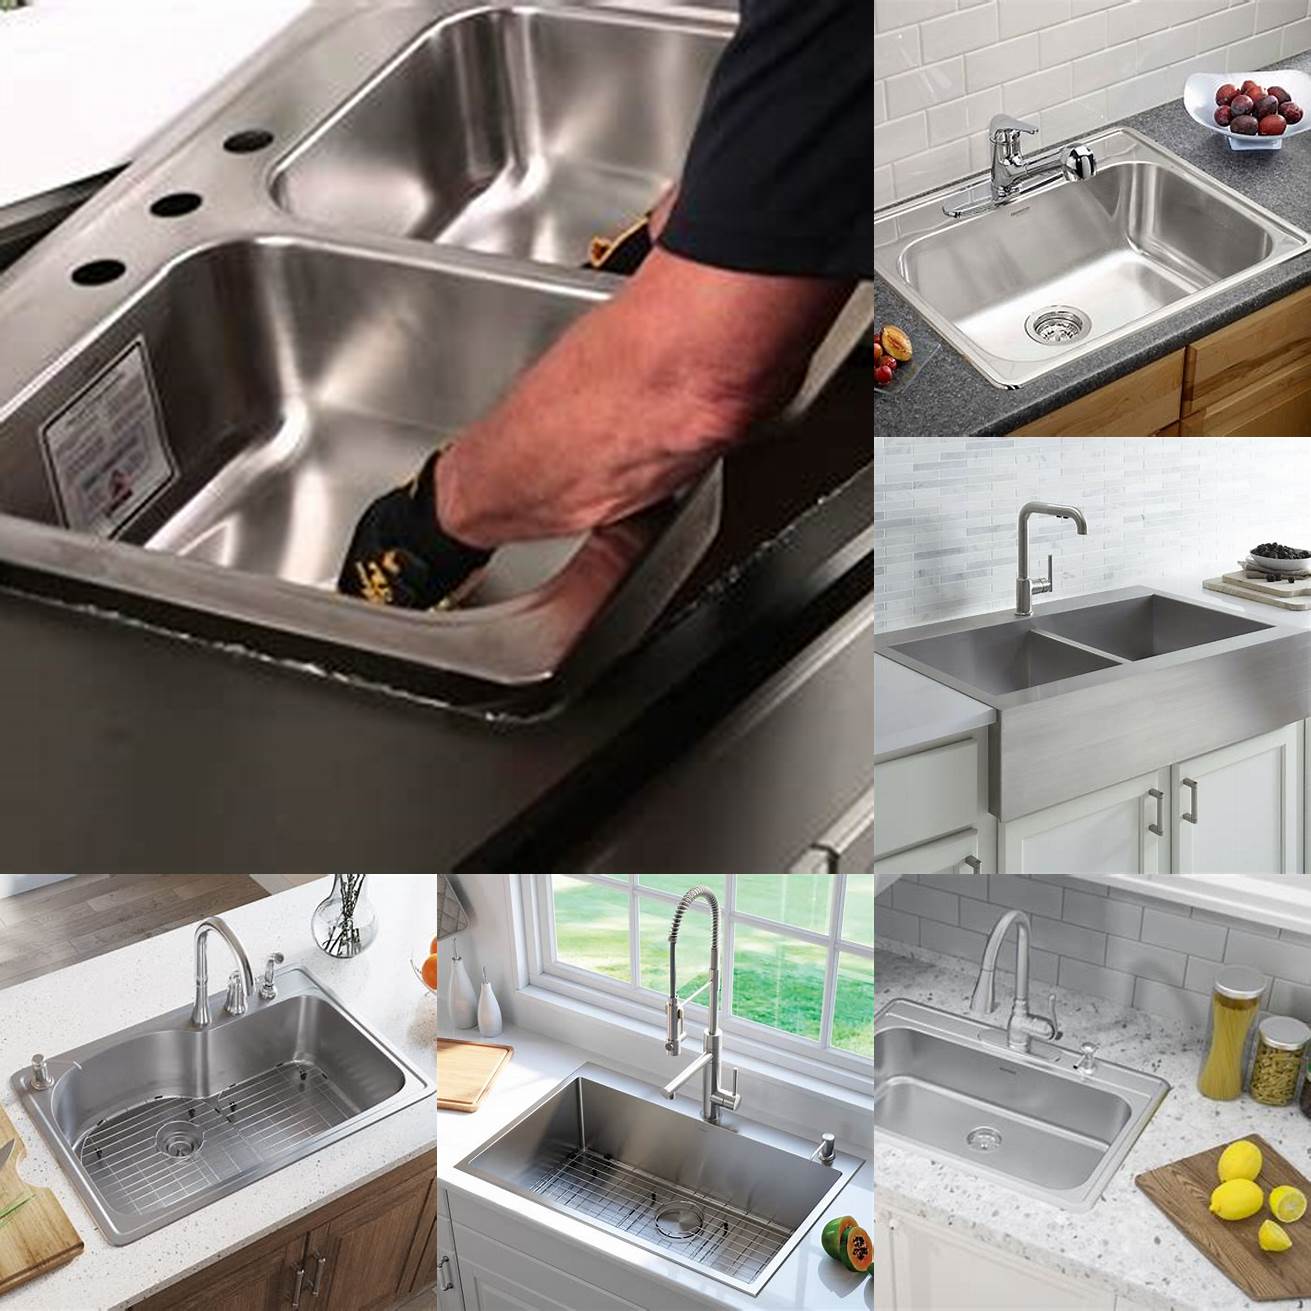 A picture of a stainless steel kitchen sink with a top mount installation